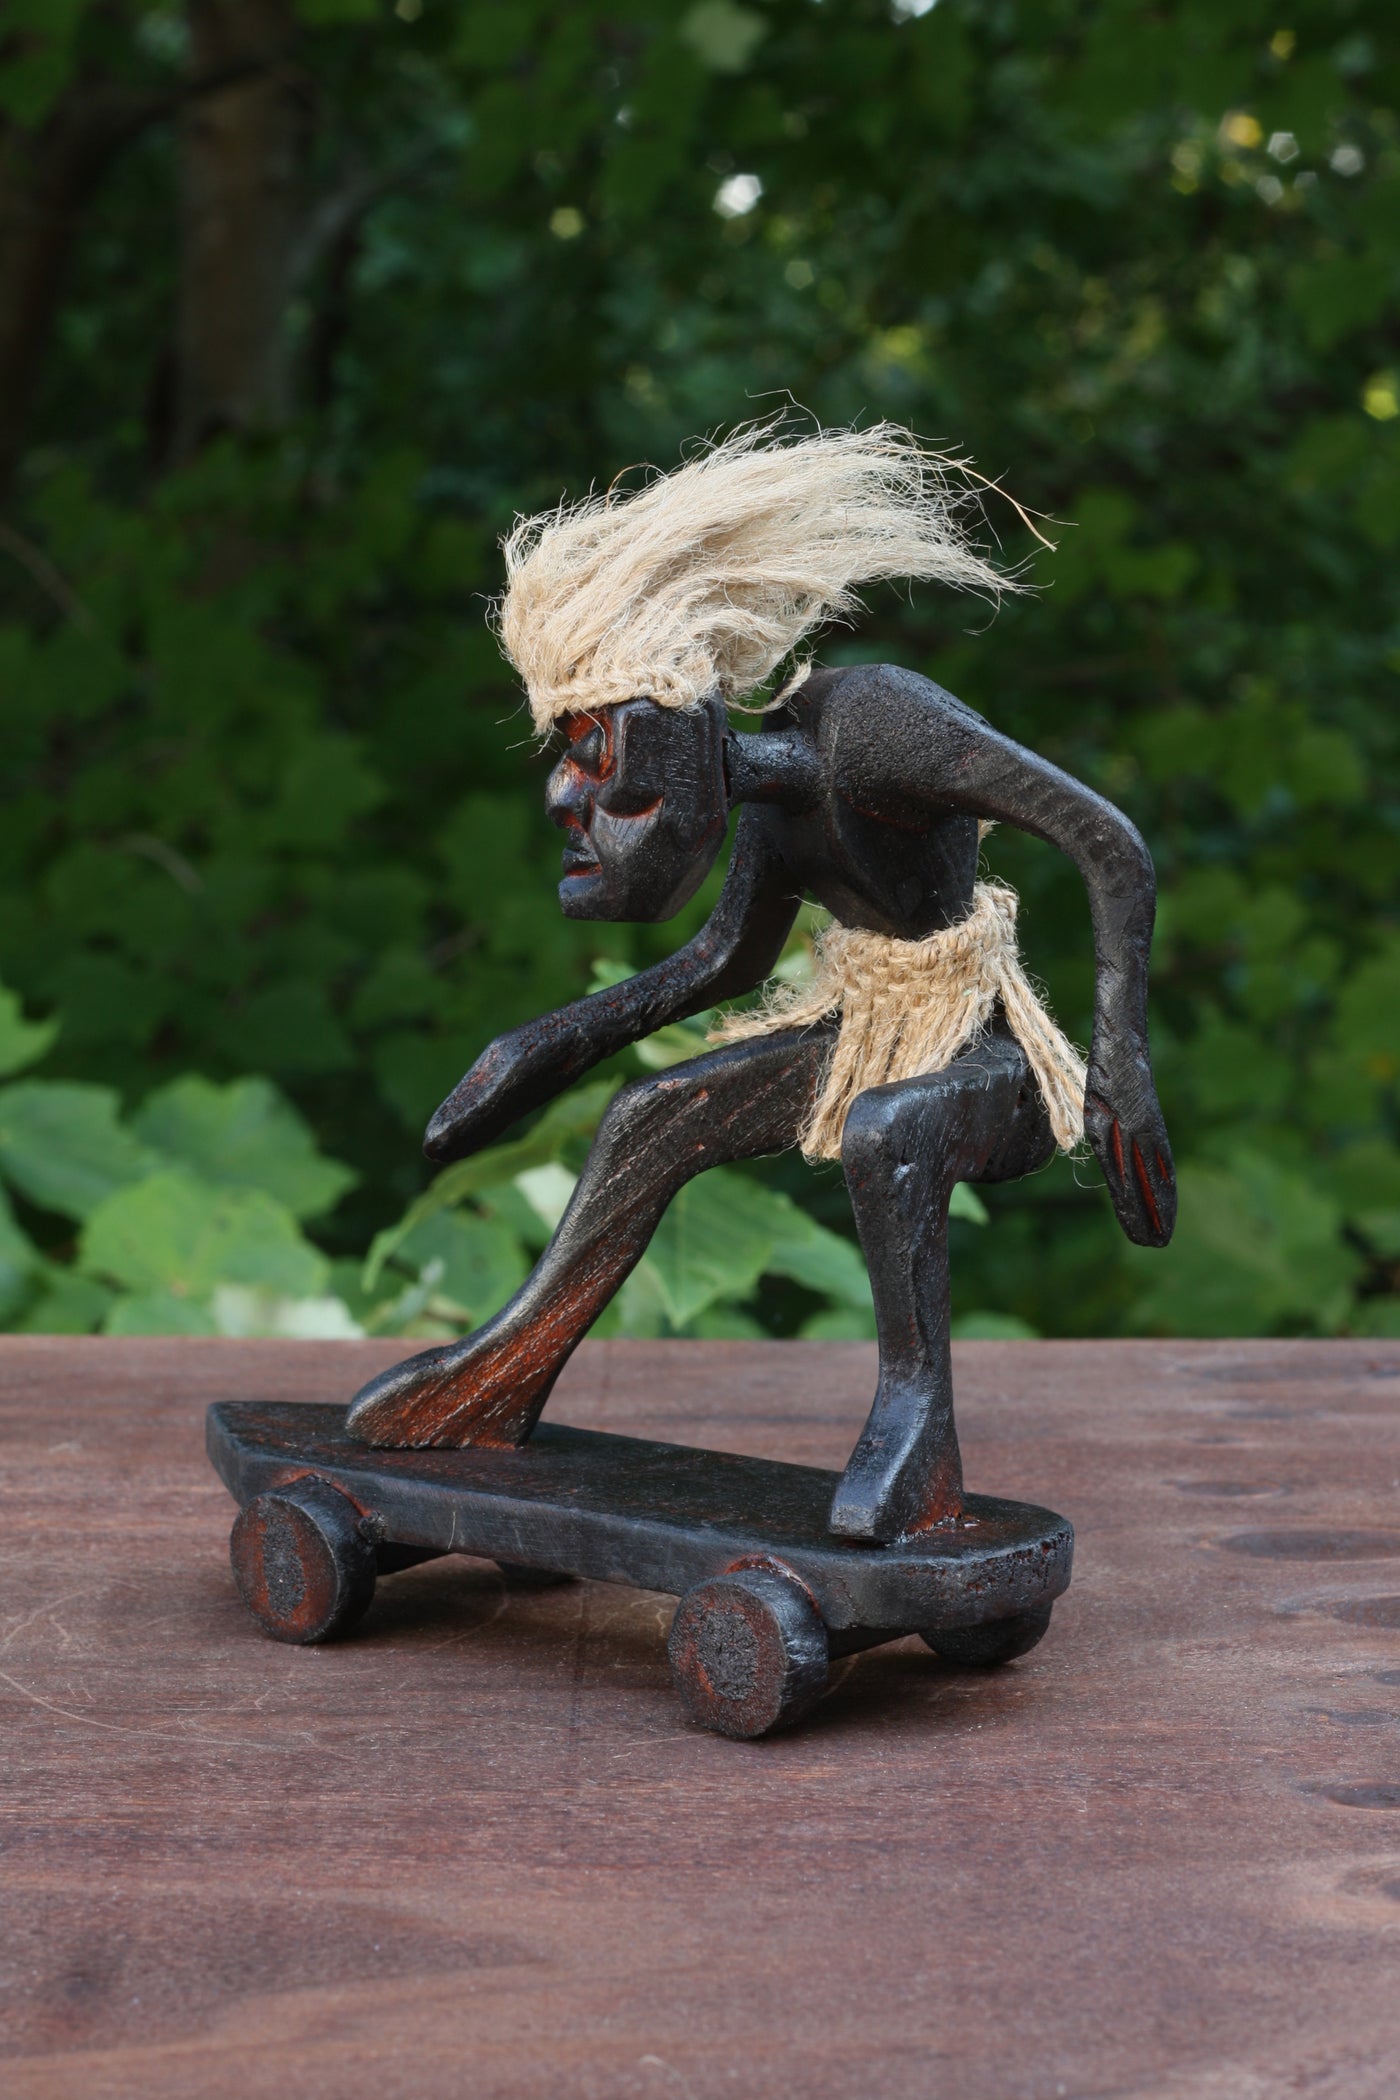 Handmade Wooden Primitive Tribal Skateboarding Statue Funny Sculpture Tiki Bar Handcrafted Unique Gift Decor Accent Figurine Hand Carved - B